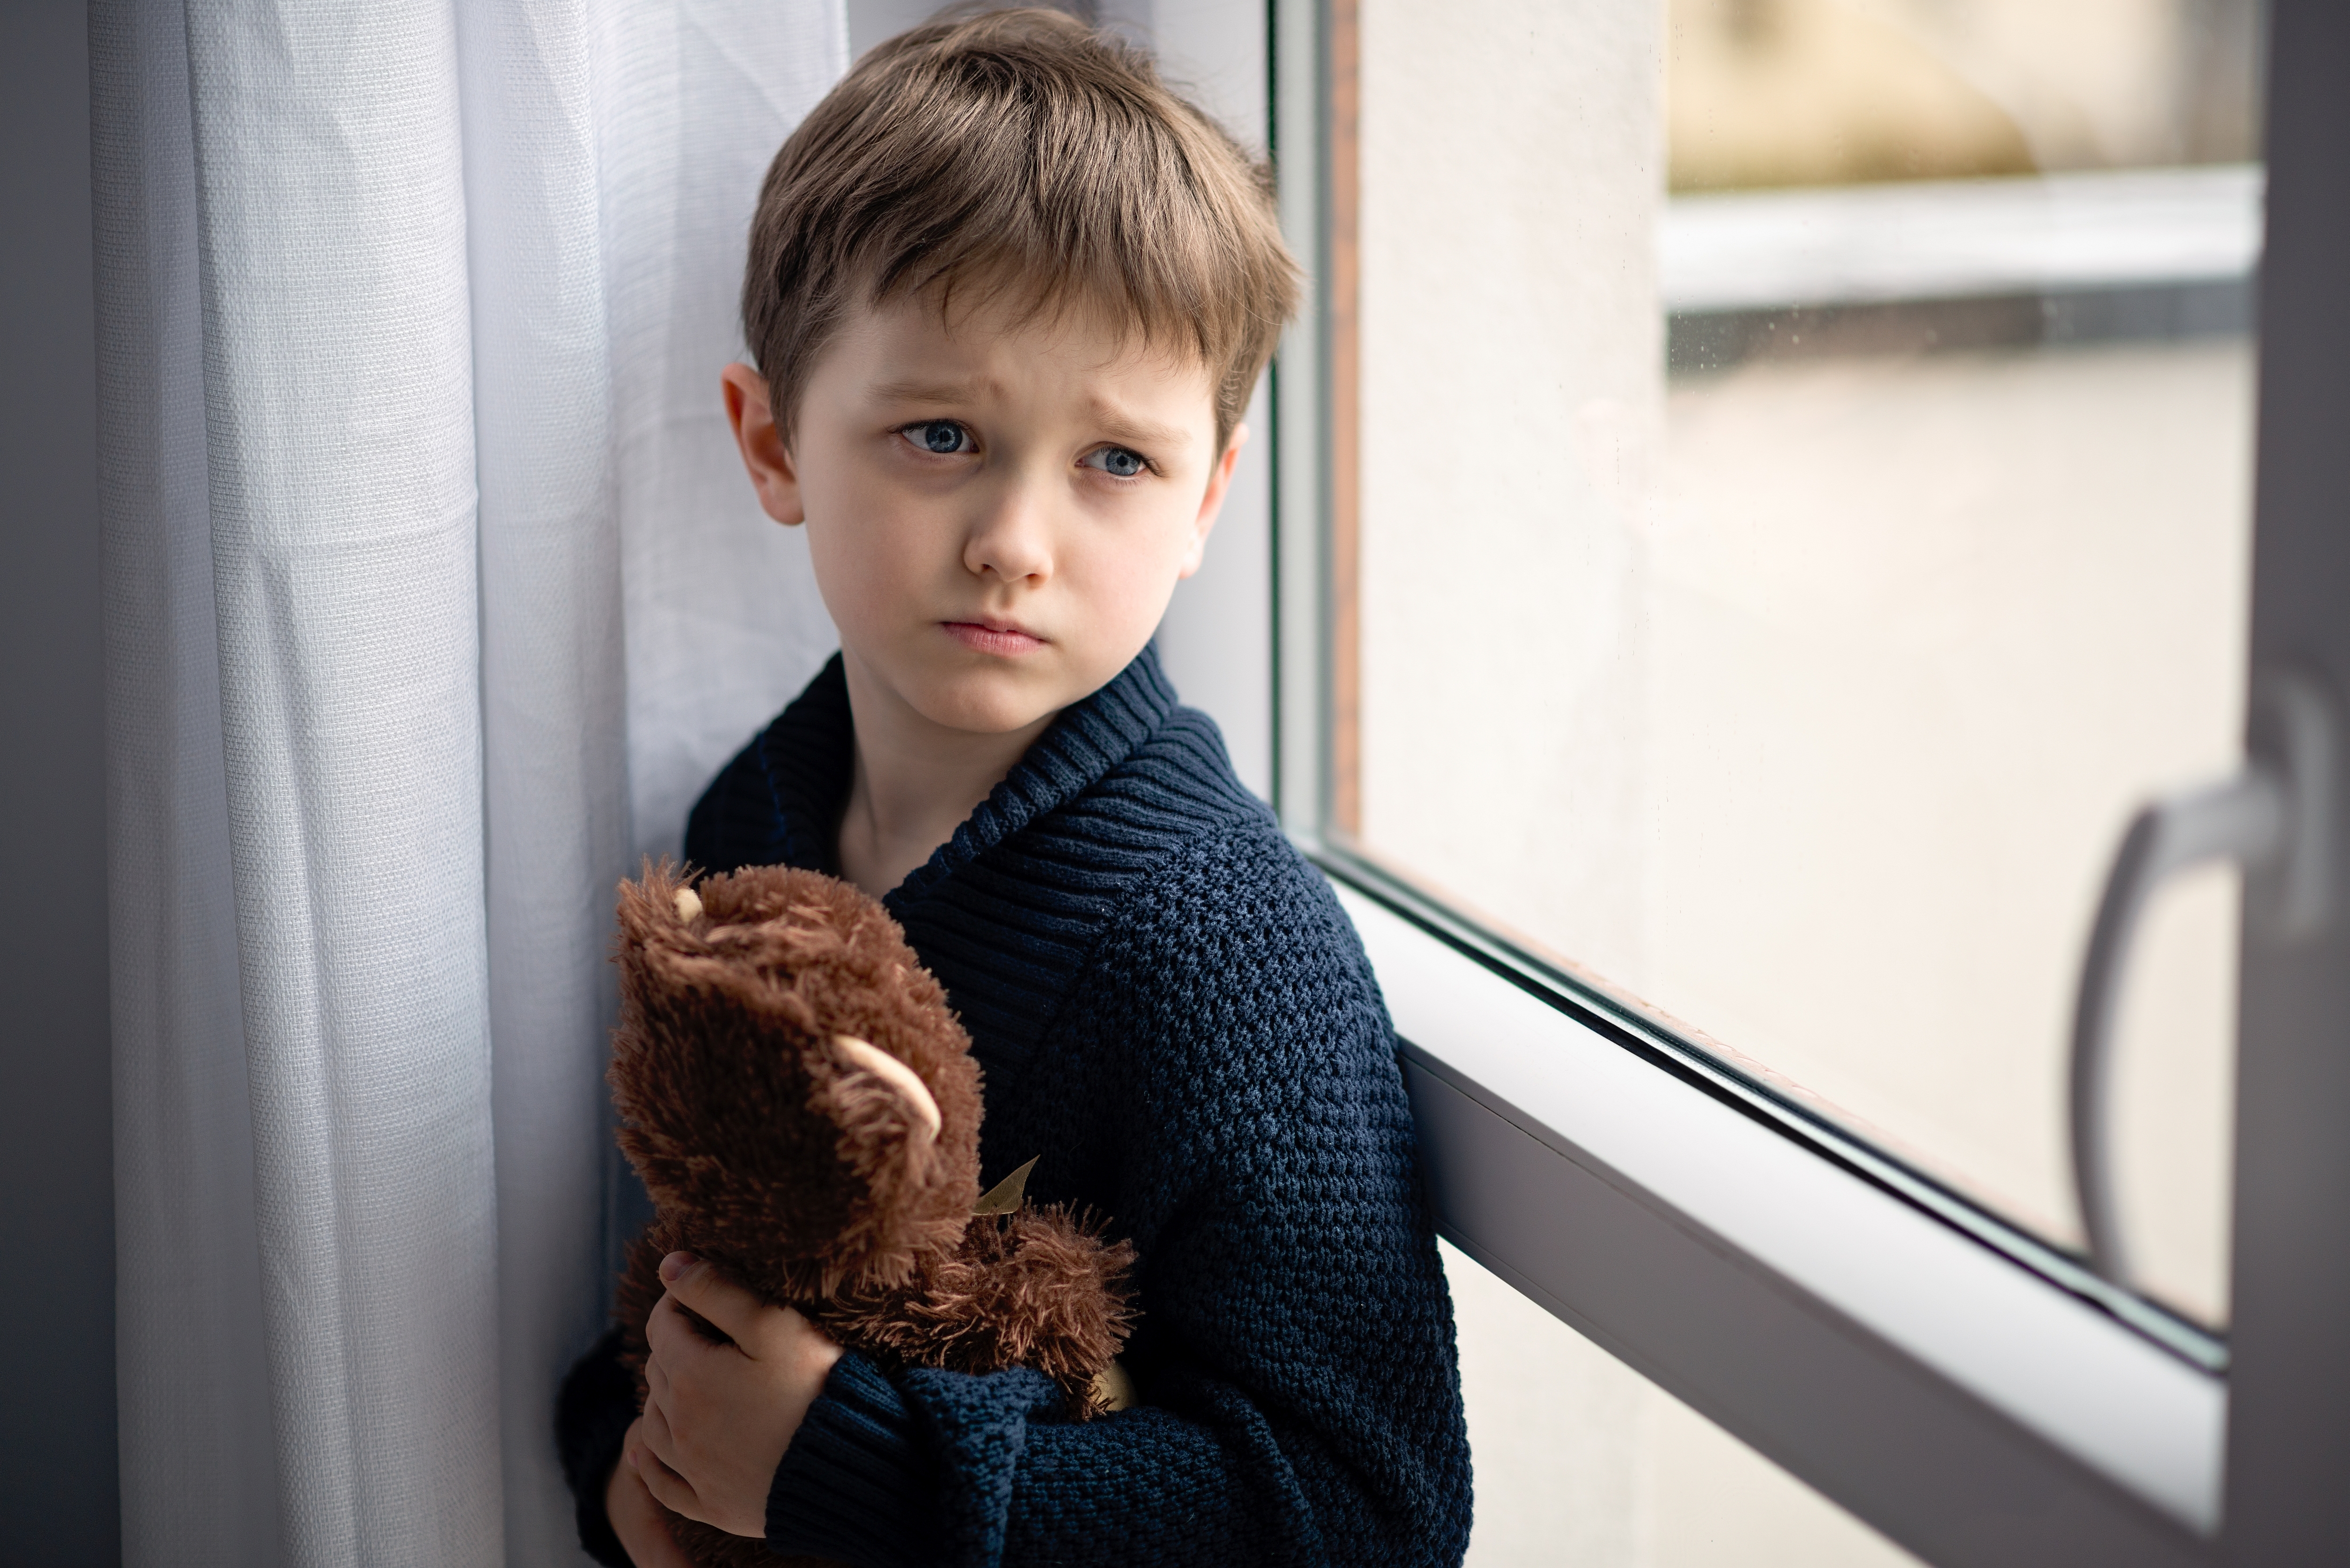 A sad young boy holding a teddy bear | Source: Shutterstock